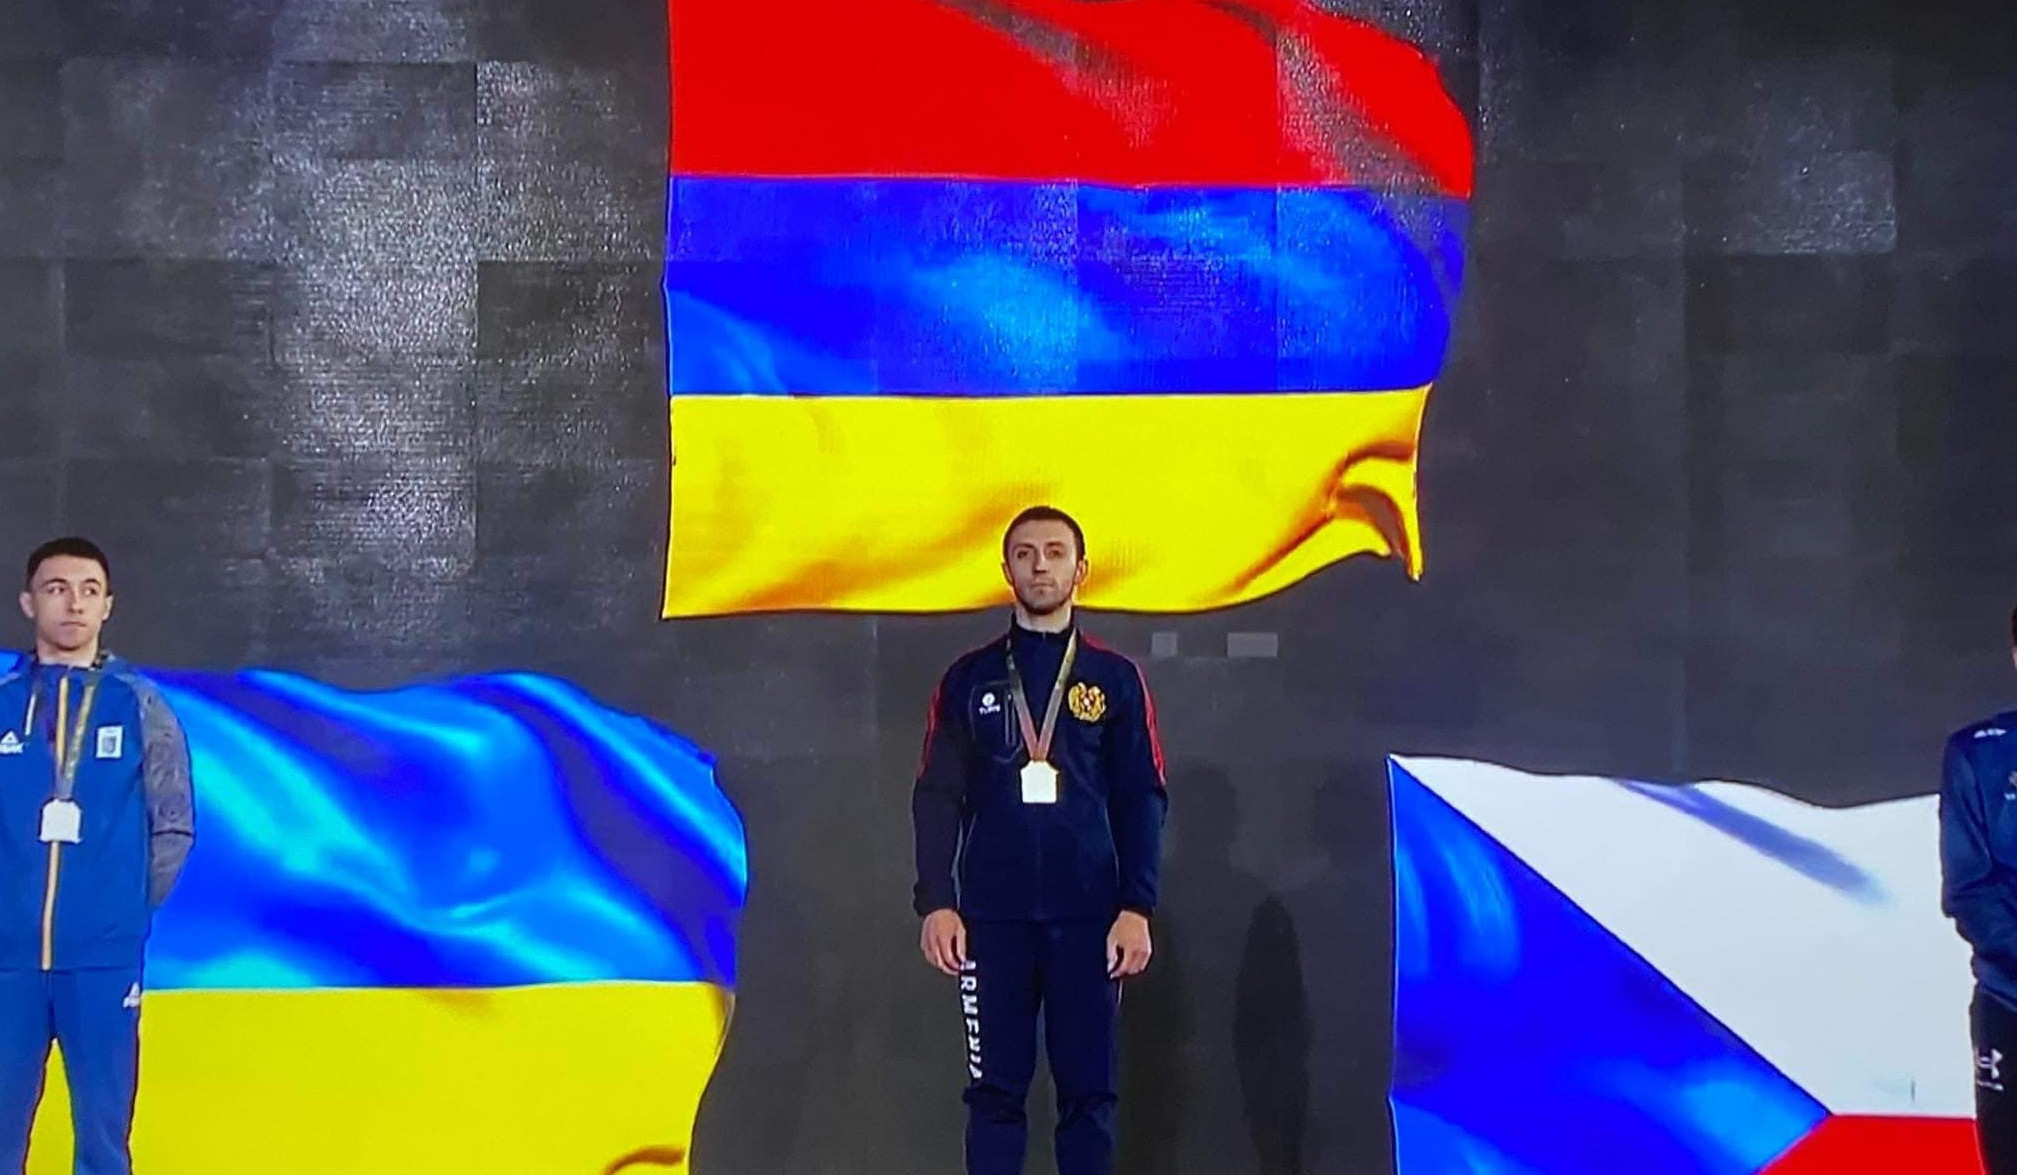 Artur Davtyan won gold medal and was declared world's absolute cup winner